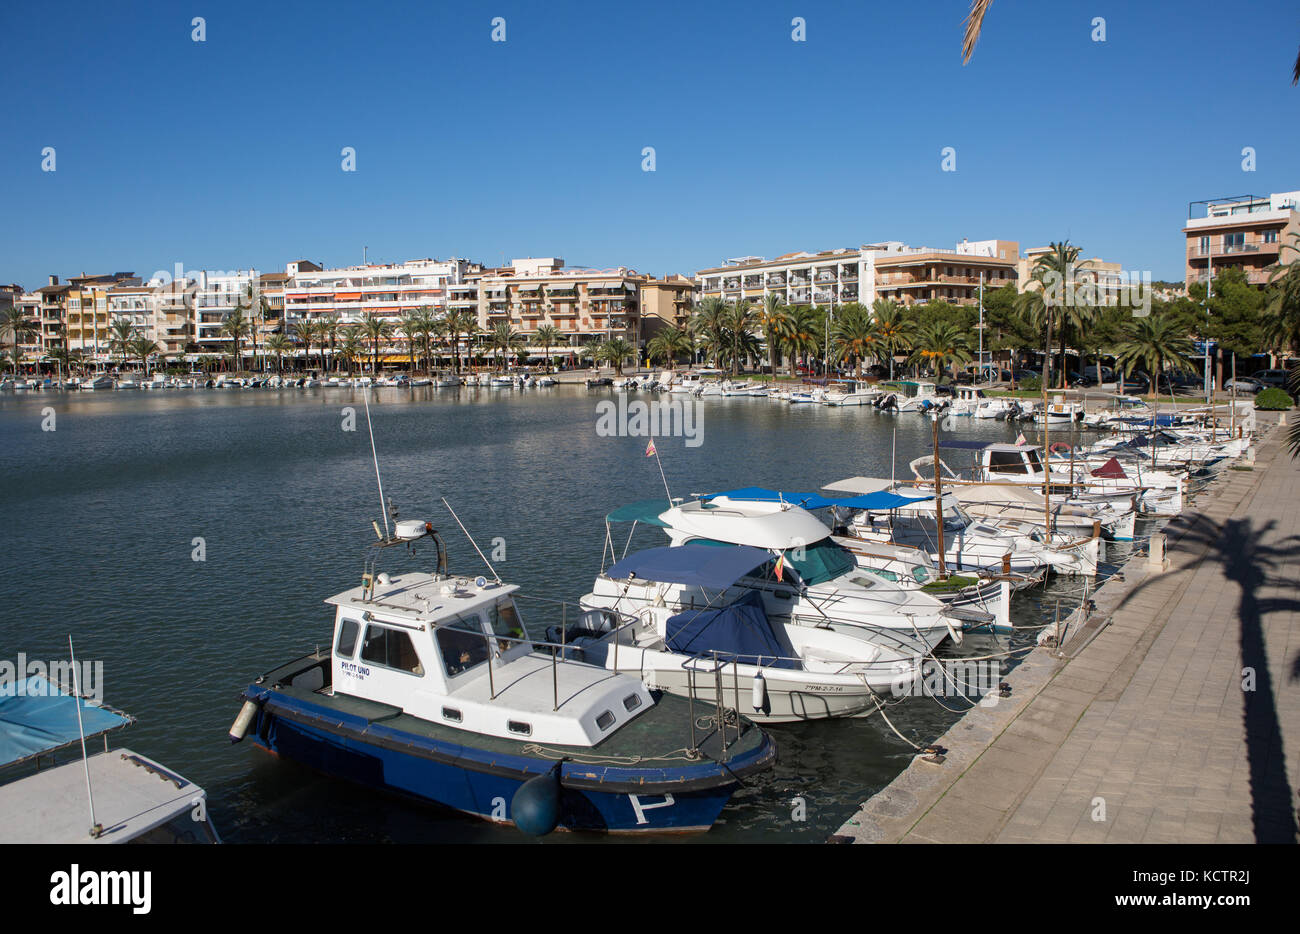 Boats moored at harbour, buildings and palm trees in background, Puerto de Alcudia, Alcudia, Majorca, Balearic Islands, Spain. Stock Photo